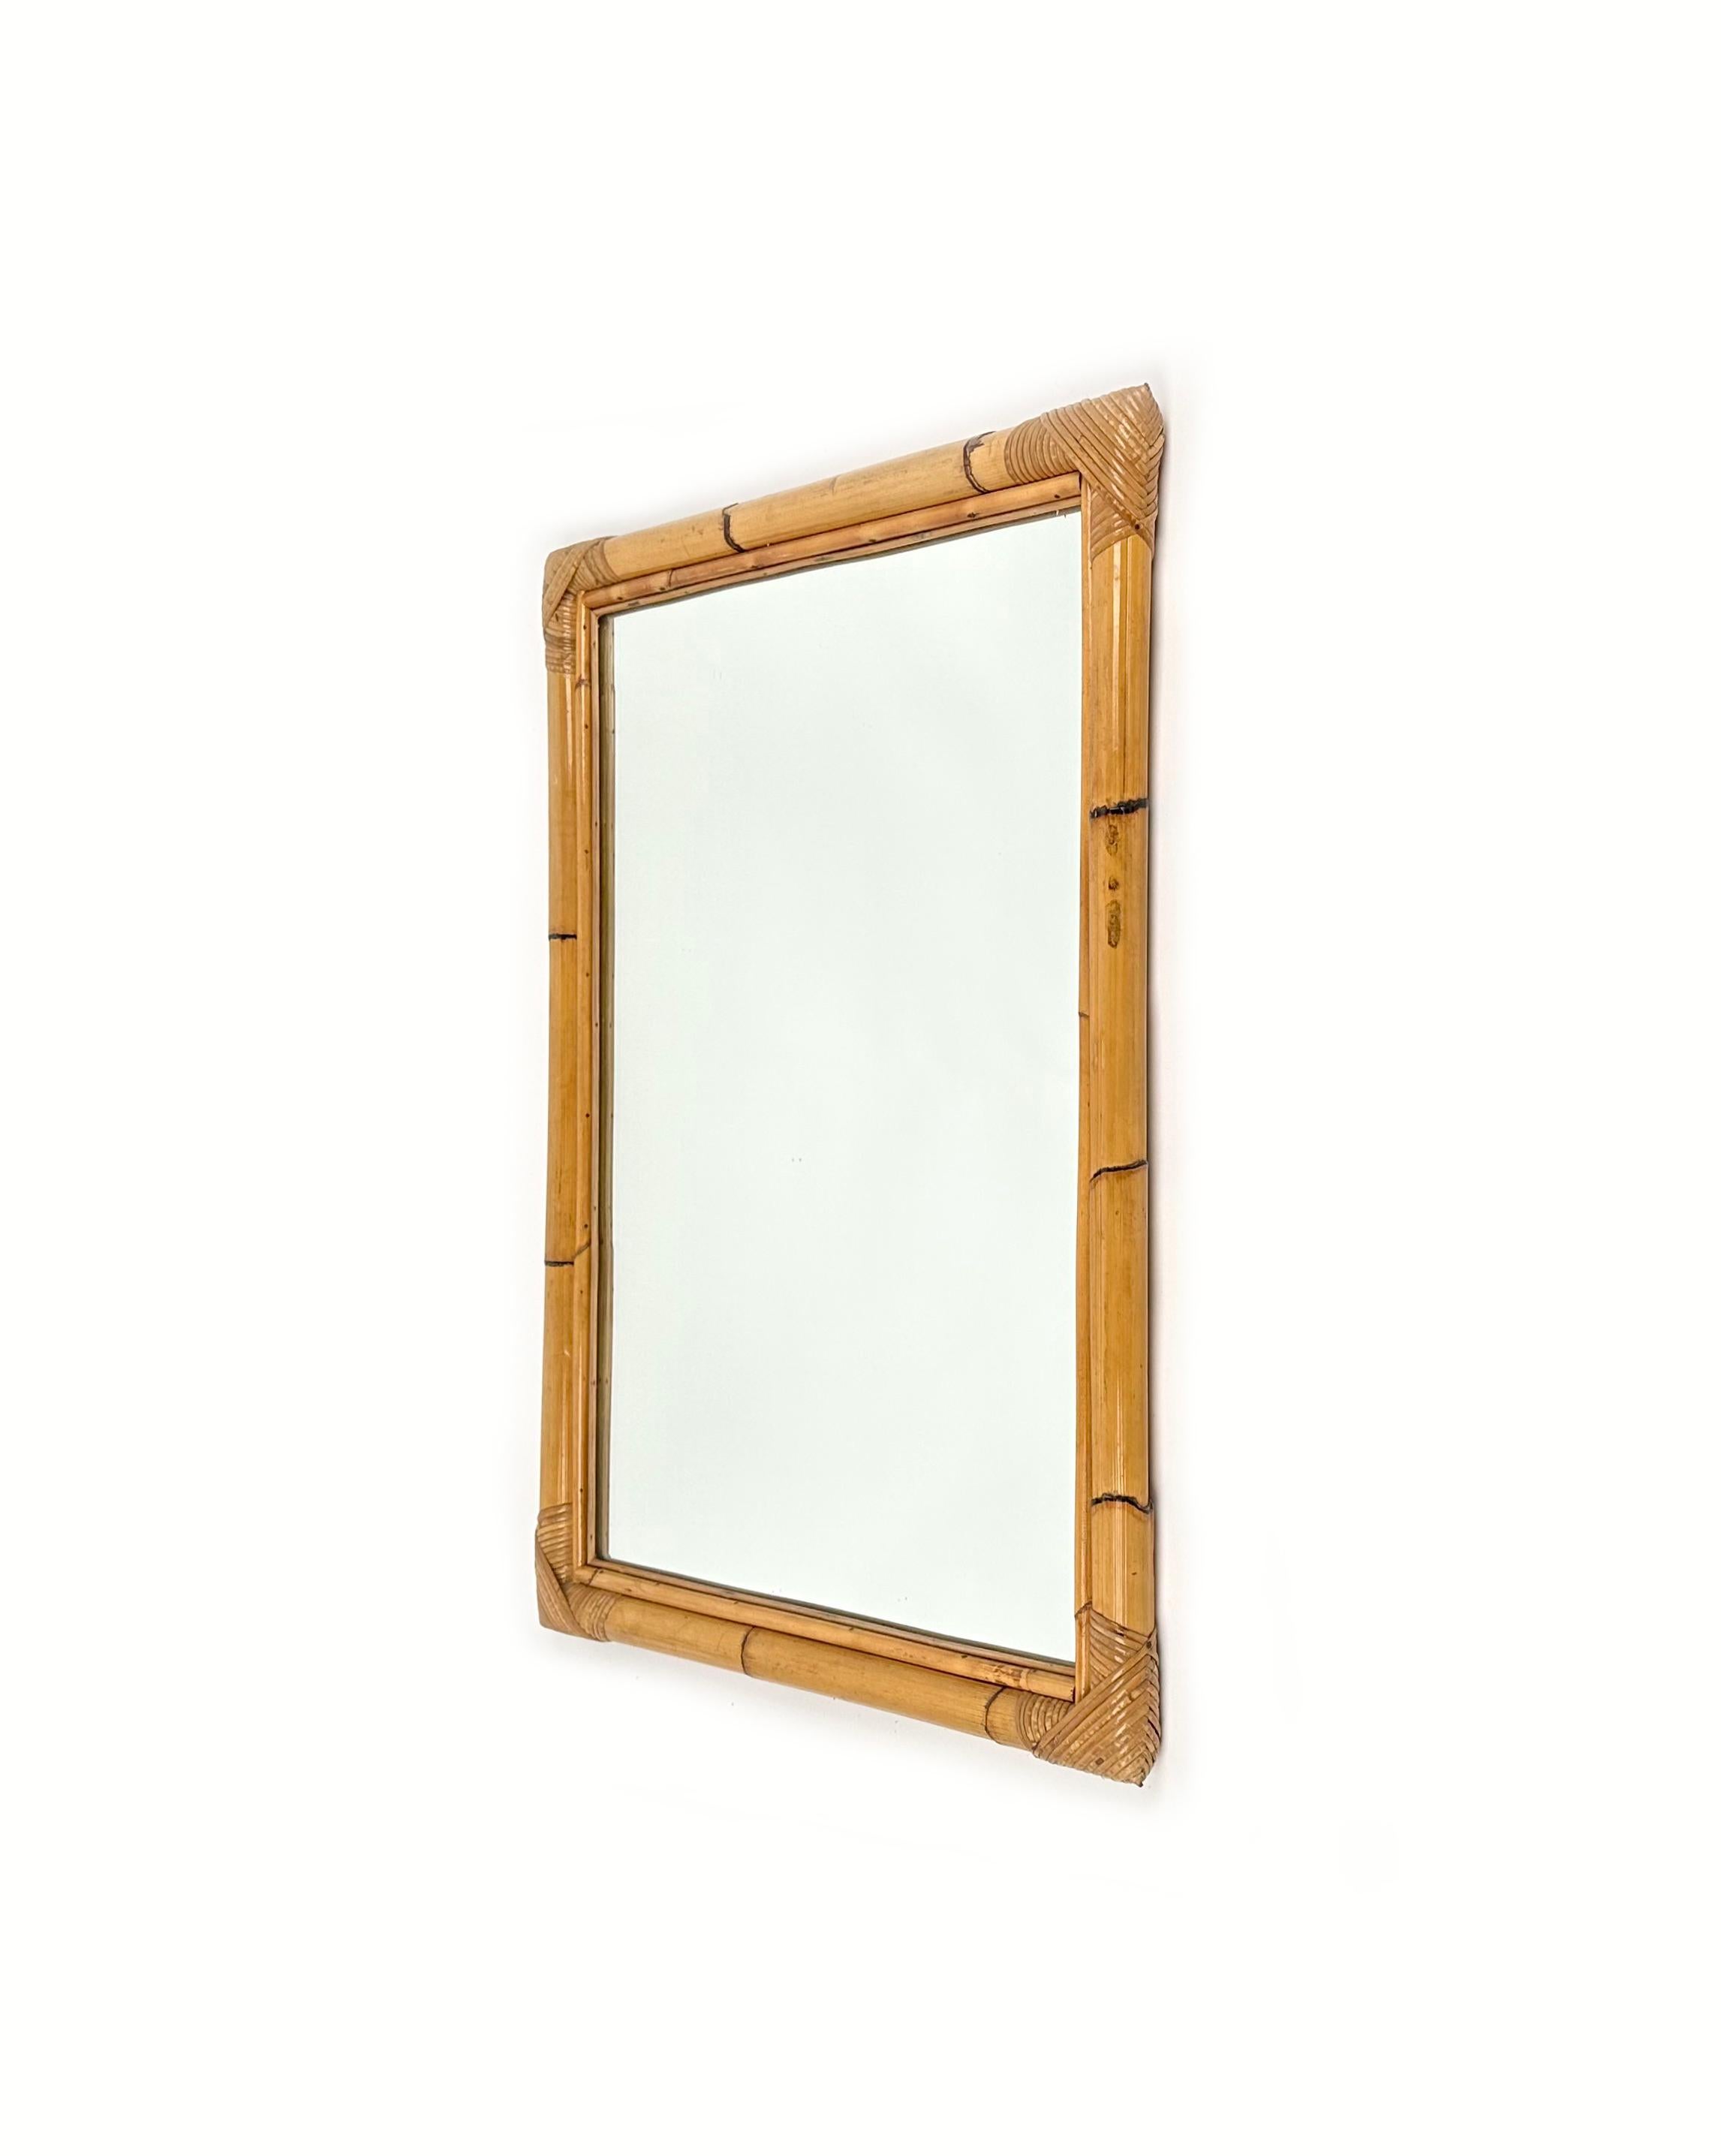 Mid-Century Rectangular Wall Mirror in Bamboo and Rattan, Italy, 1970s For Sale 5